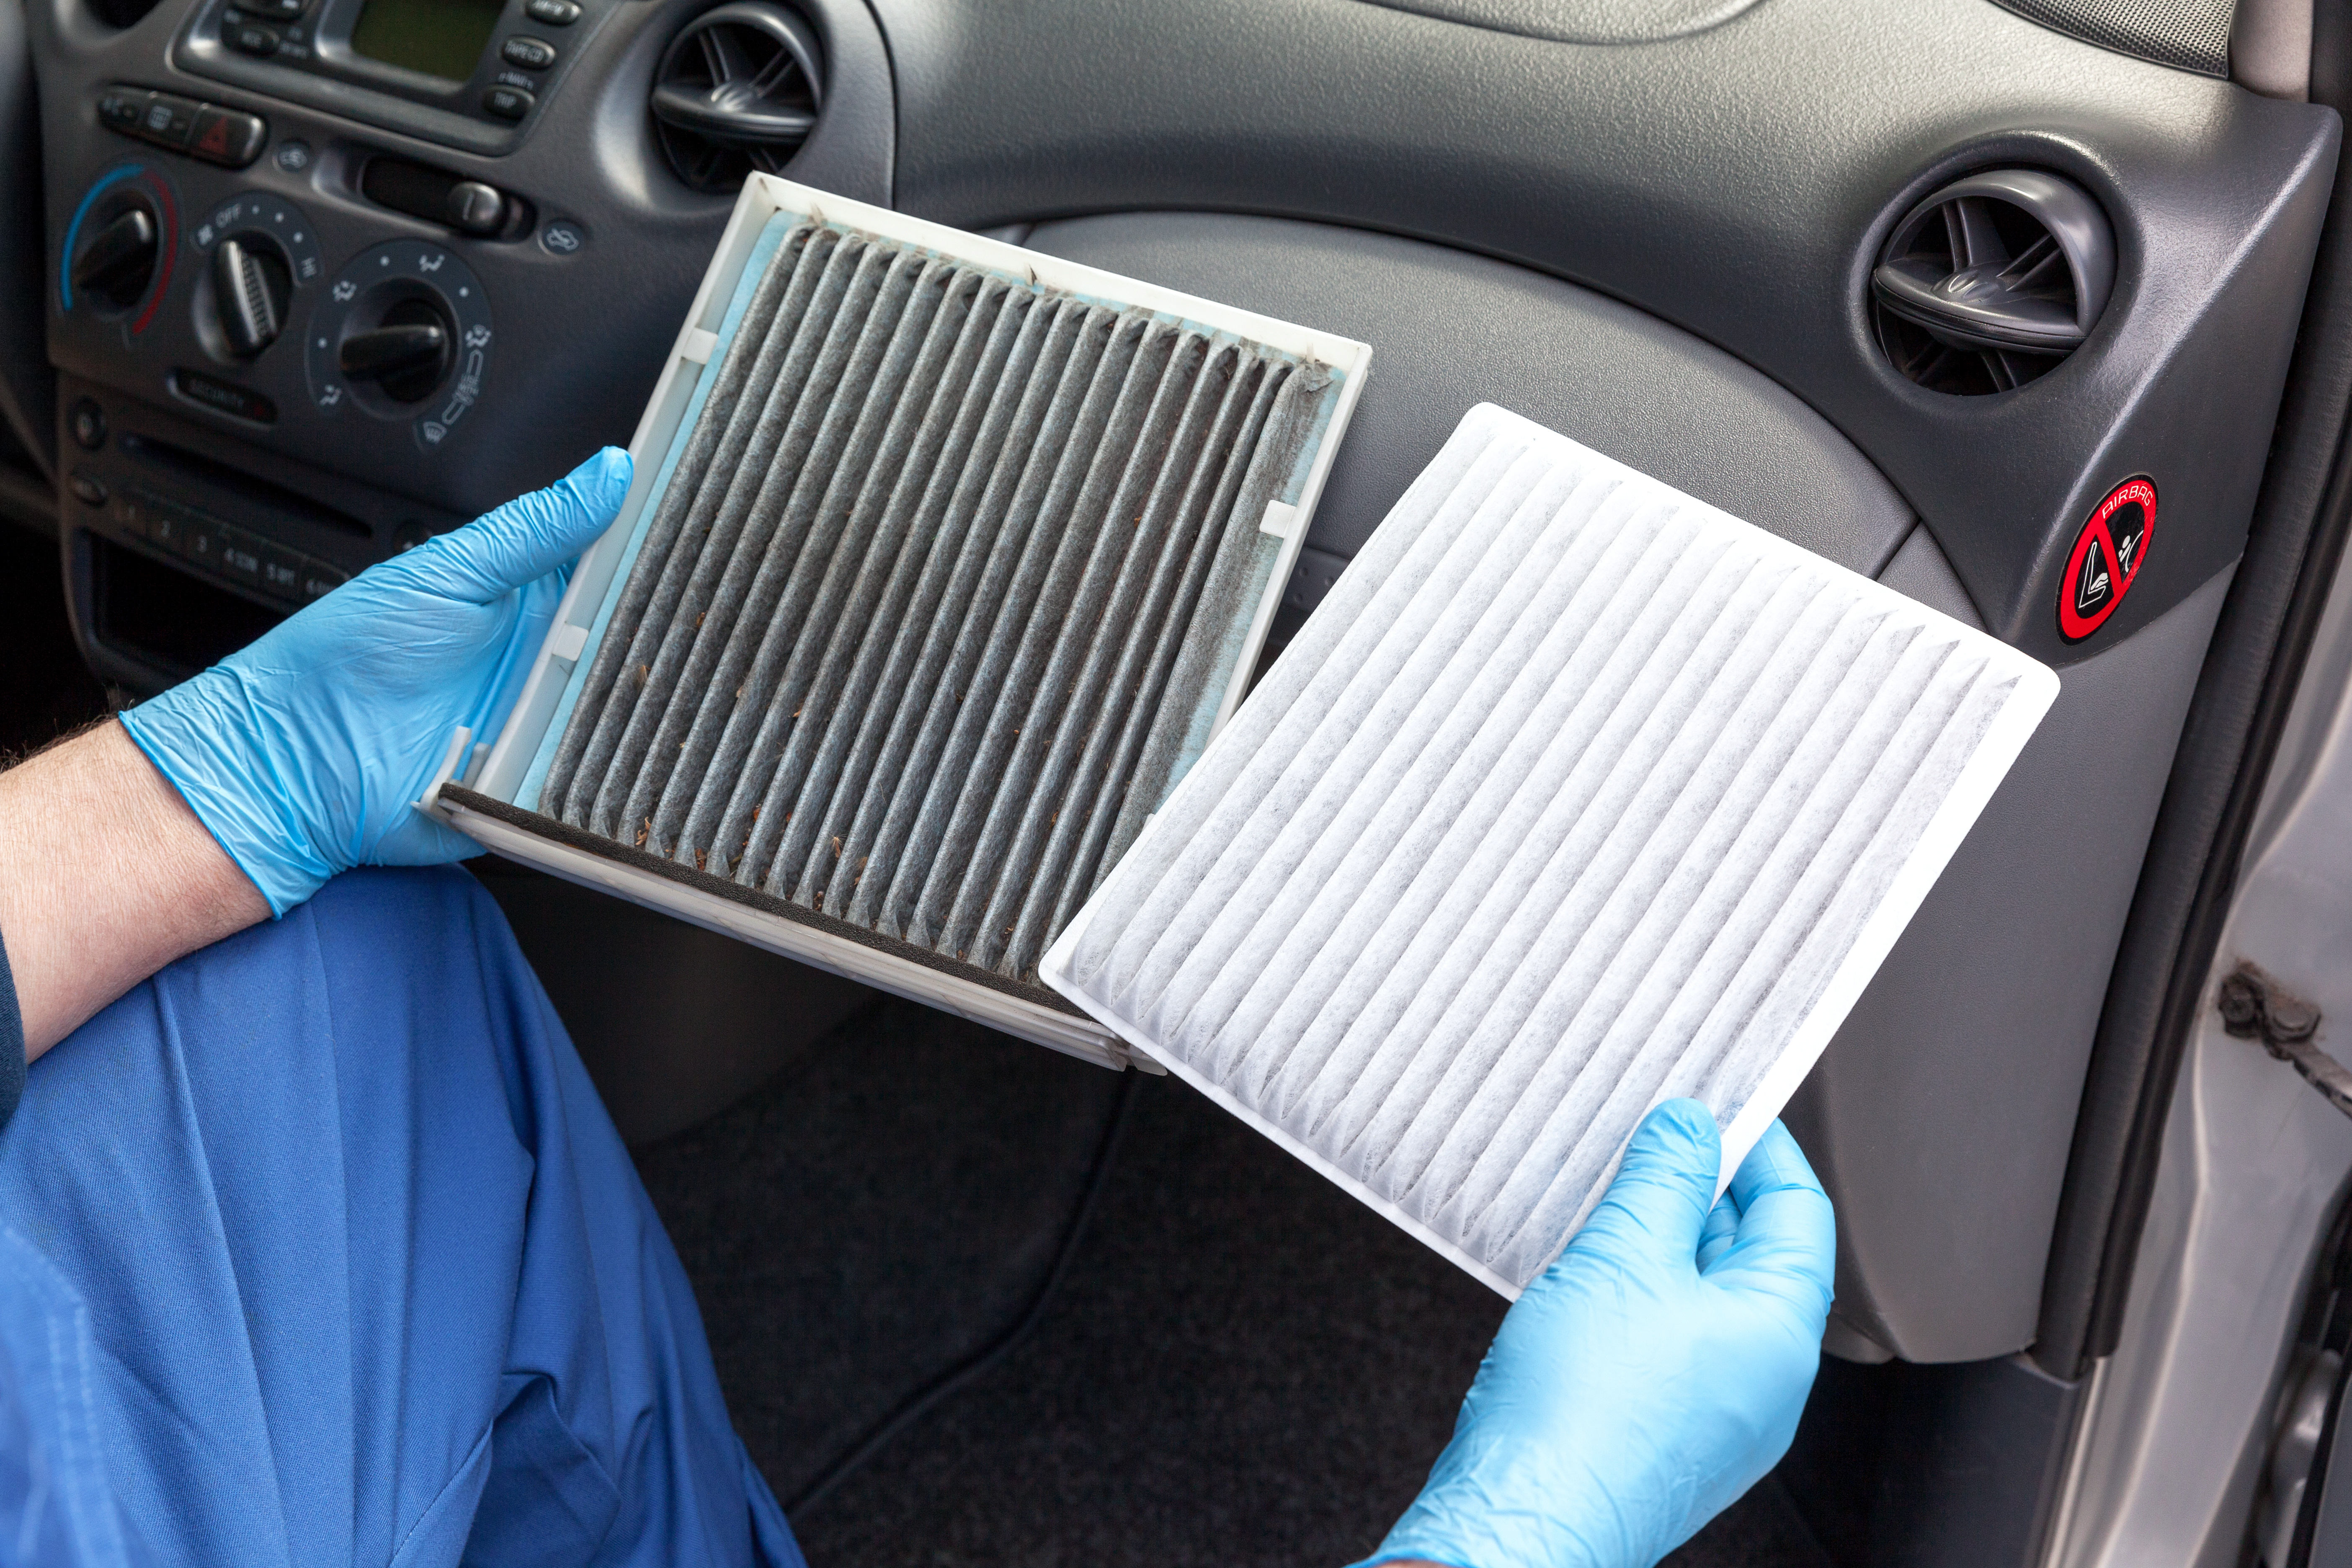 When Should You Replace Your Cabin Air Filter?